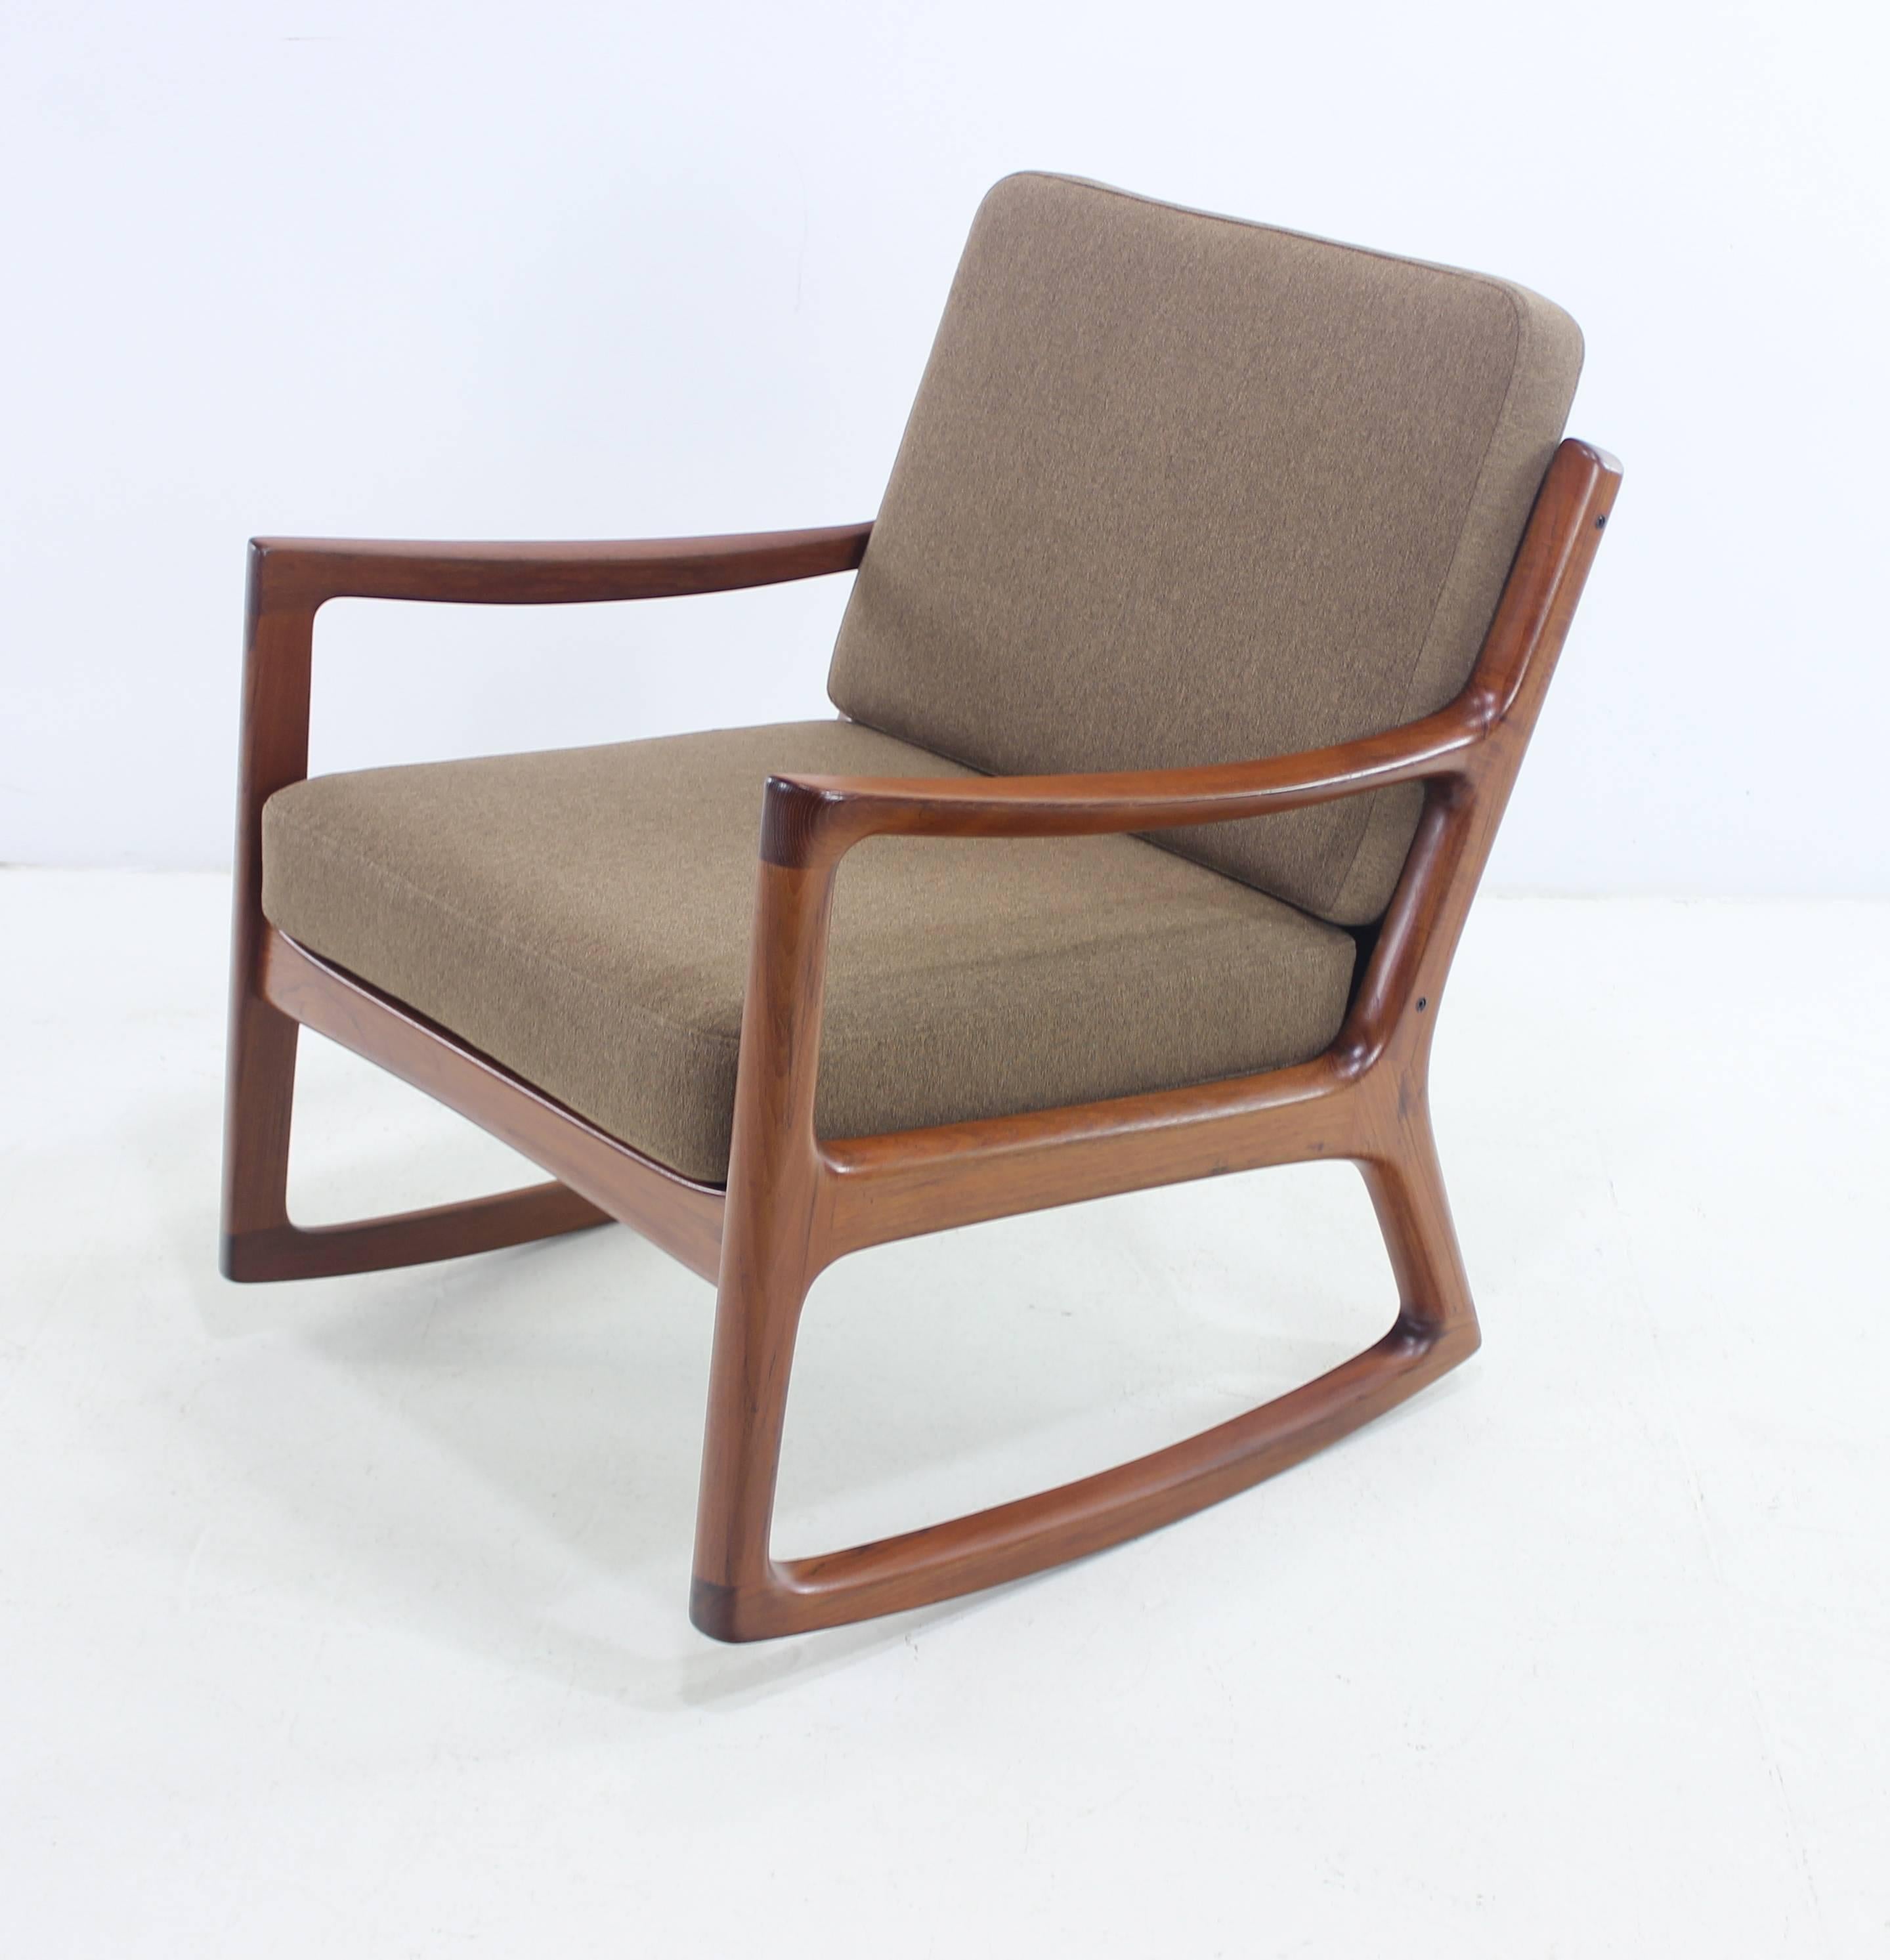 Danish modern rocker with heavier frame designed by Ole Wanscher.
Richly grained teak frame with elegant style and superior craftsmanship.
Original metal springs newly upholstered in highest quality period fabric.
Solid comfort and